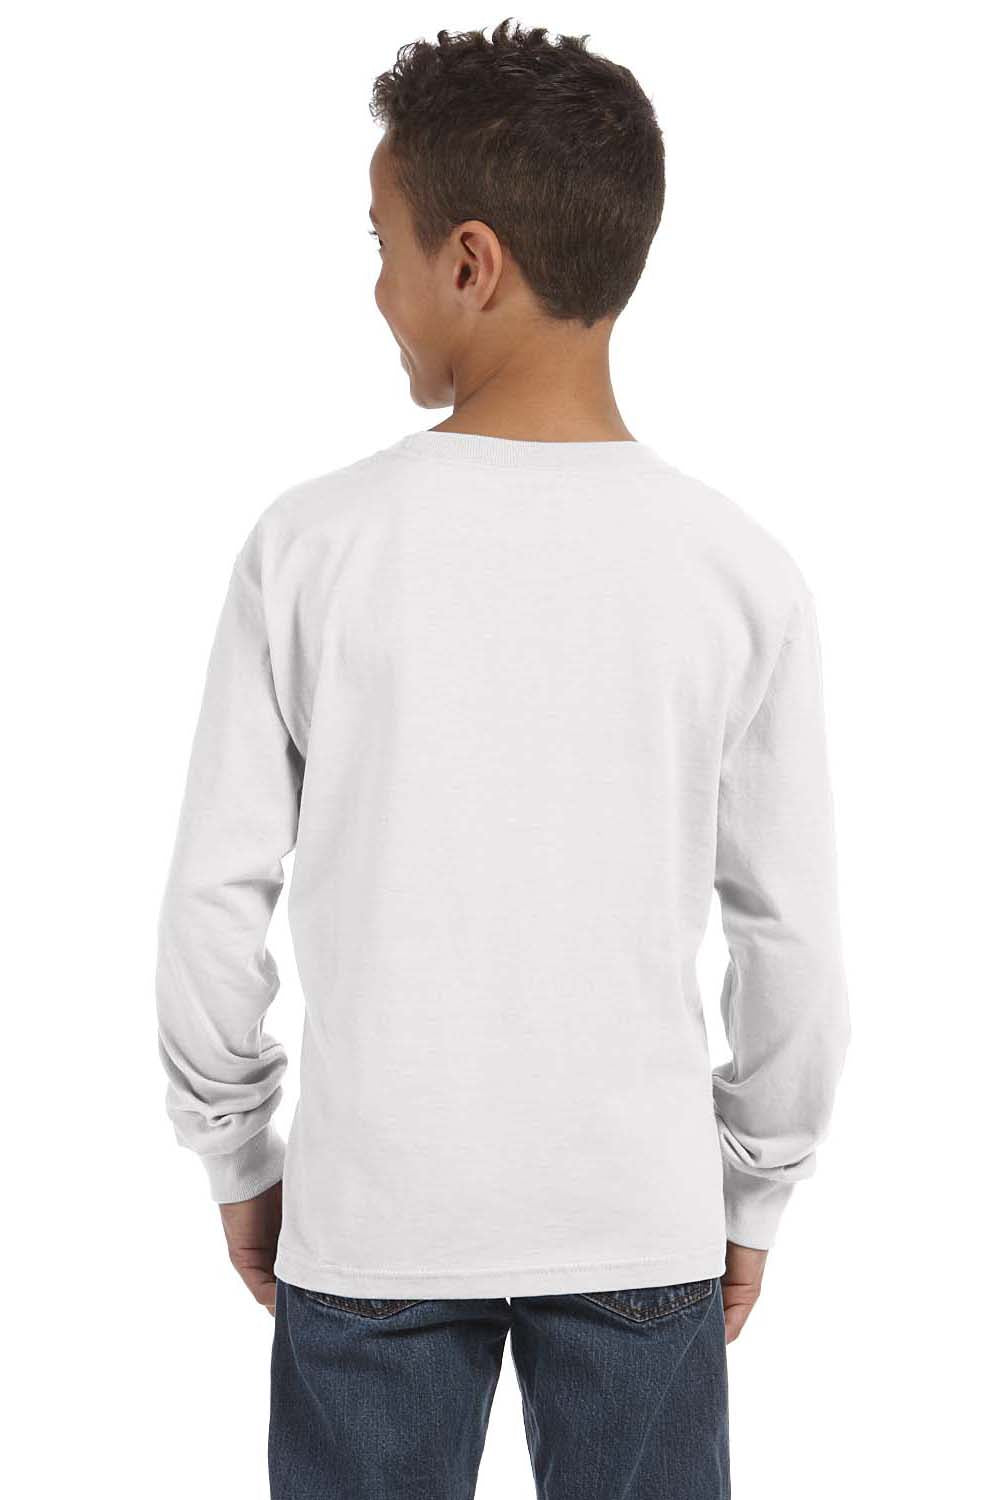 Fruit Of The Loom 4930B Youth HD Jersey Long Sleeve Crewneck T-Shirt White Back